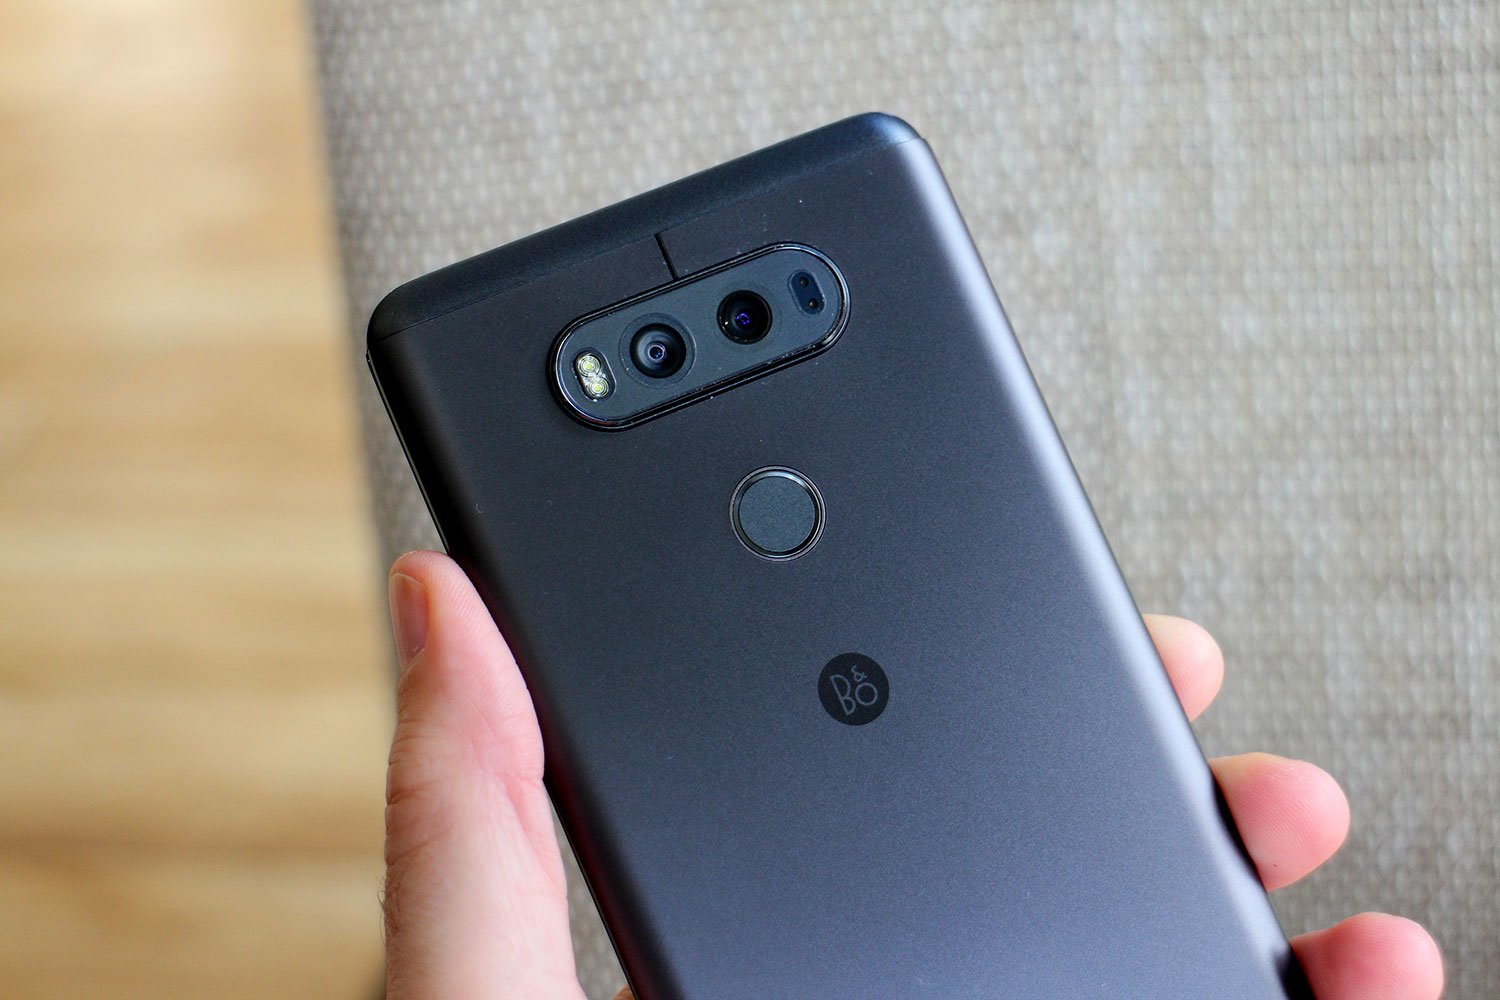 The successor the V20, the V30 is expected to be a hit in the market. It is expected to come with a display in the ratio 2:1, while recent rumors claim that